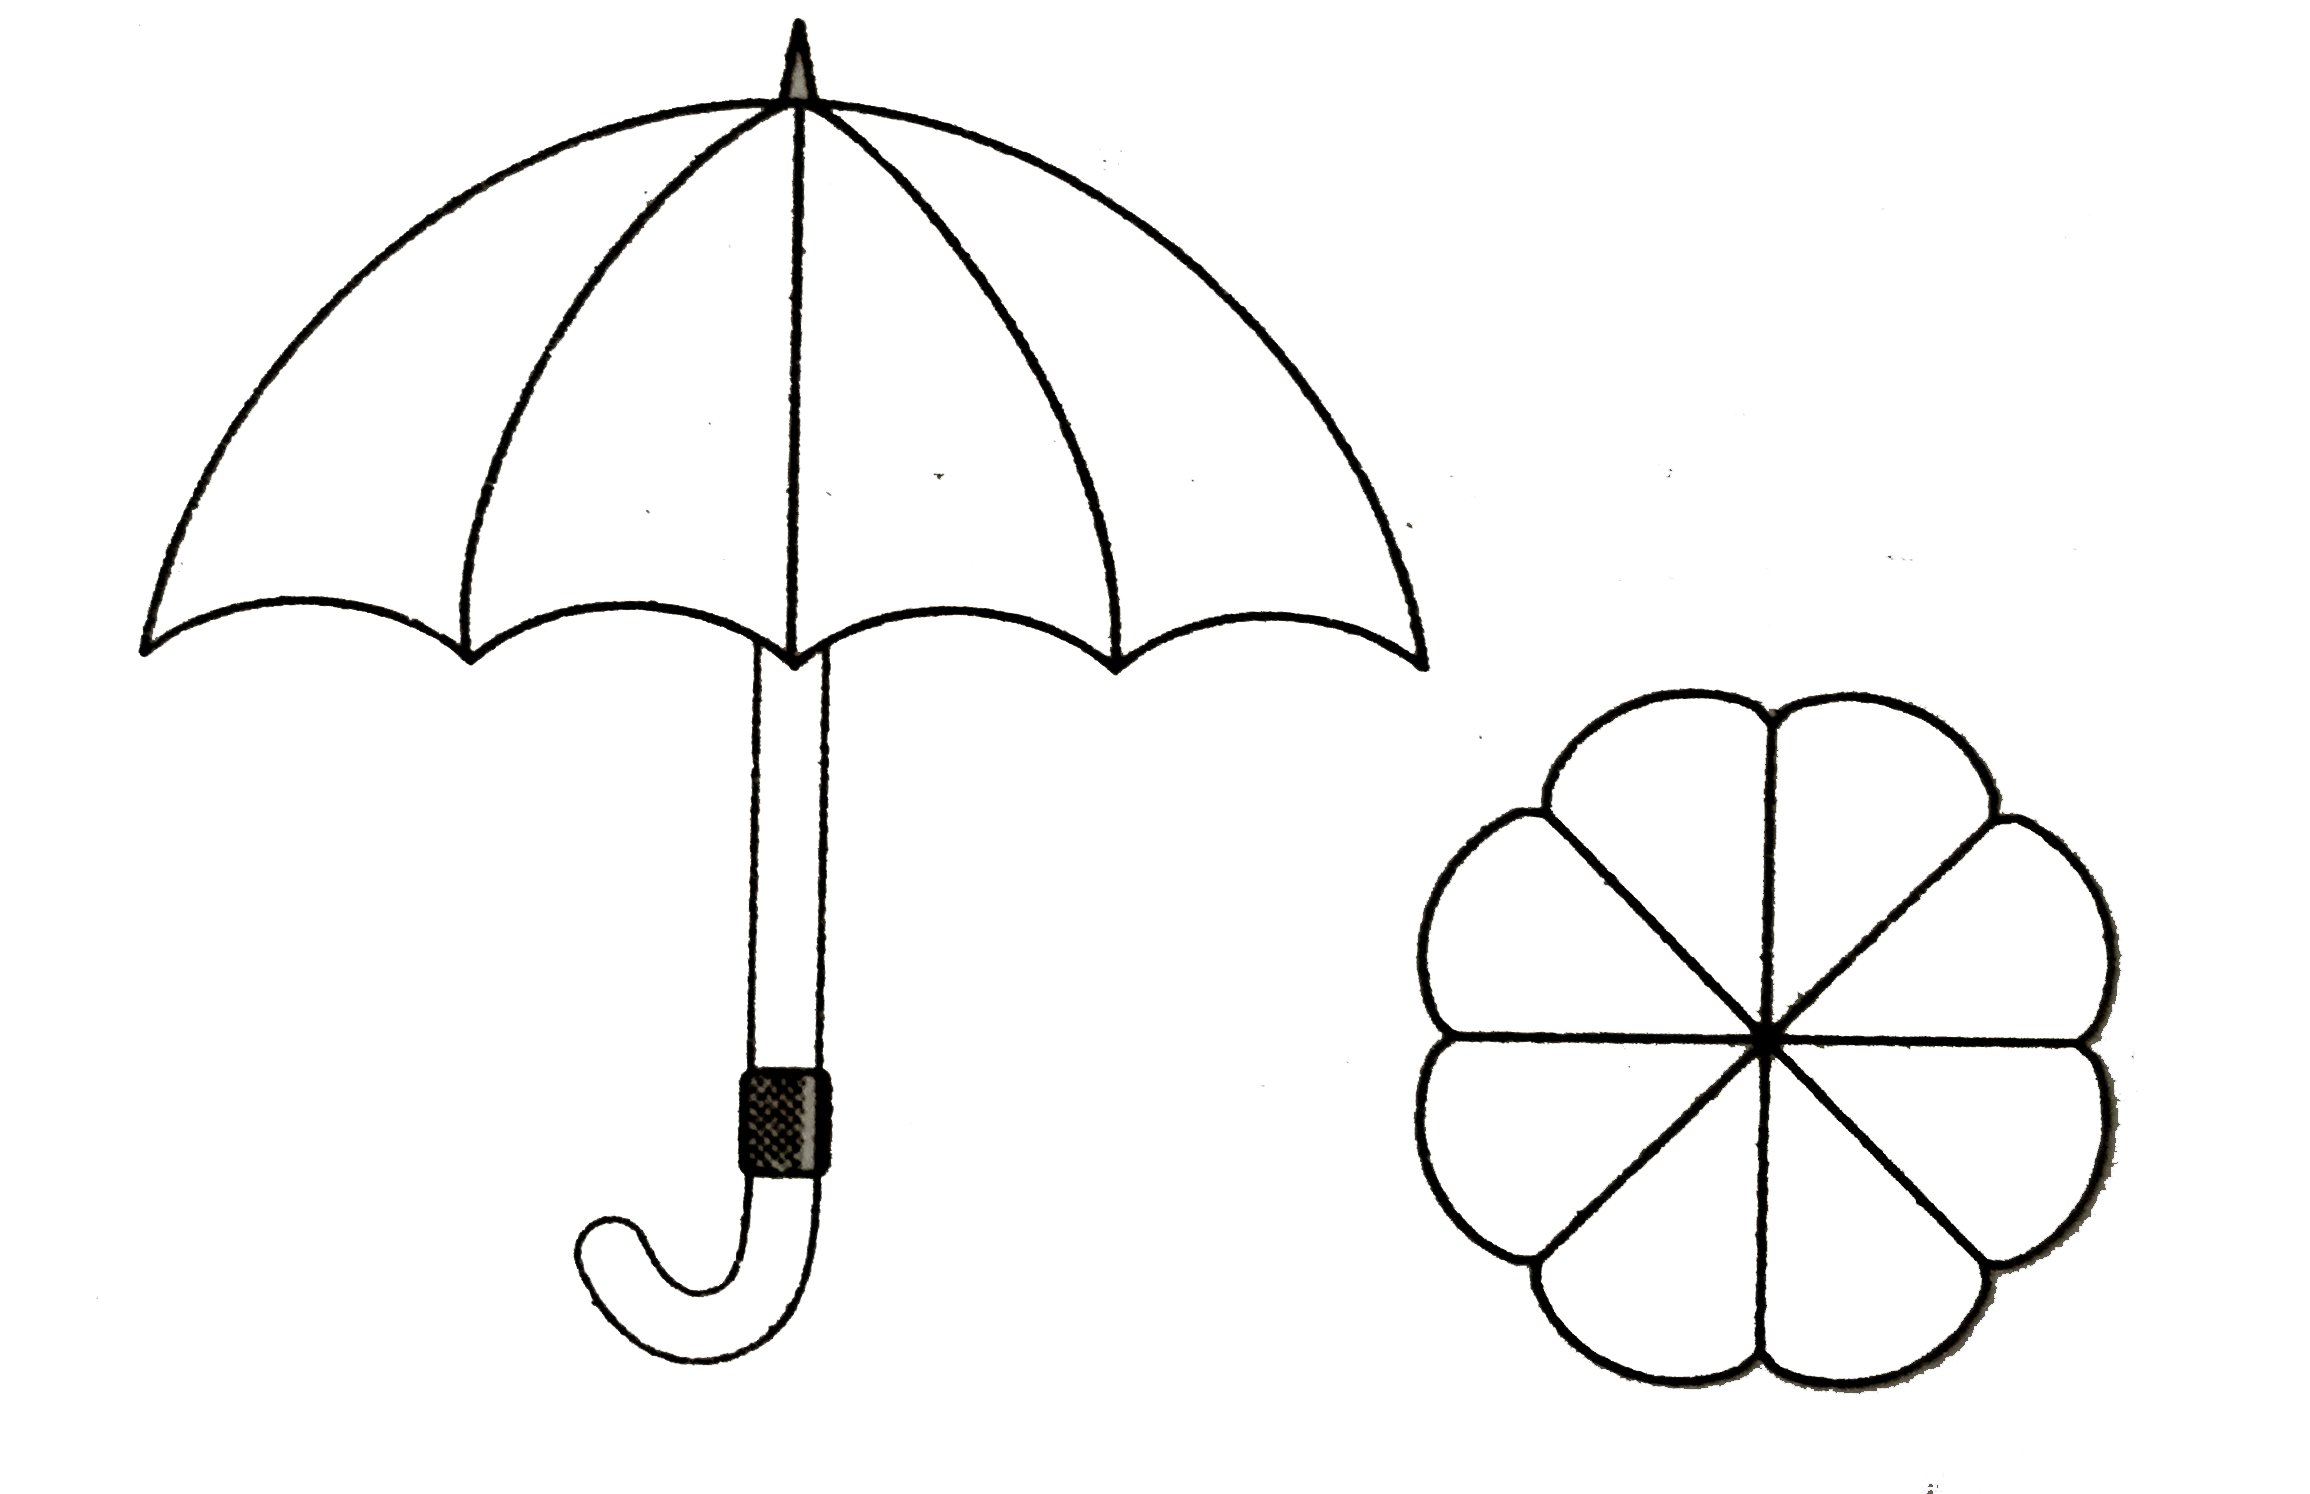 An umbrella has 8 ribs which are equally spaced (as shown in the figure).Assuming the umbrella to be a flat circle of radius 42 cm, find the area between the two consecutive ribs of the umbrella.